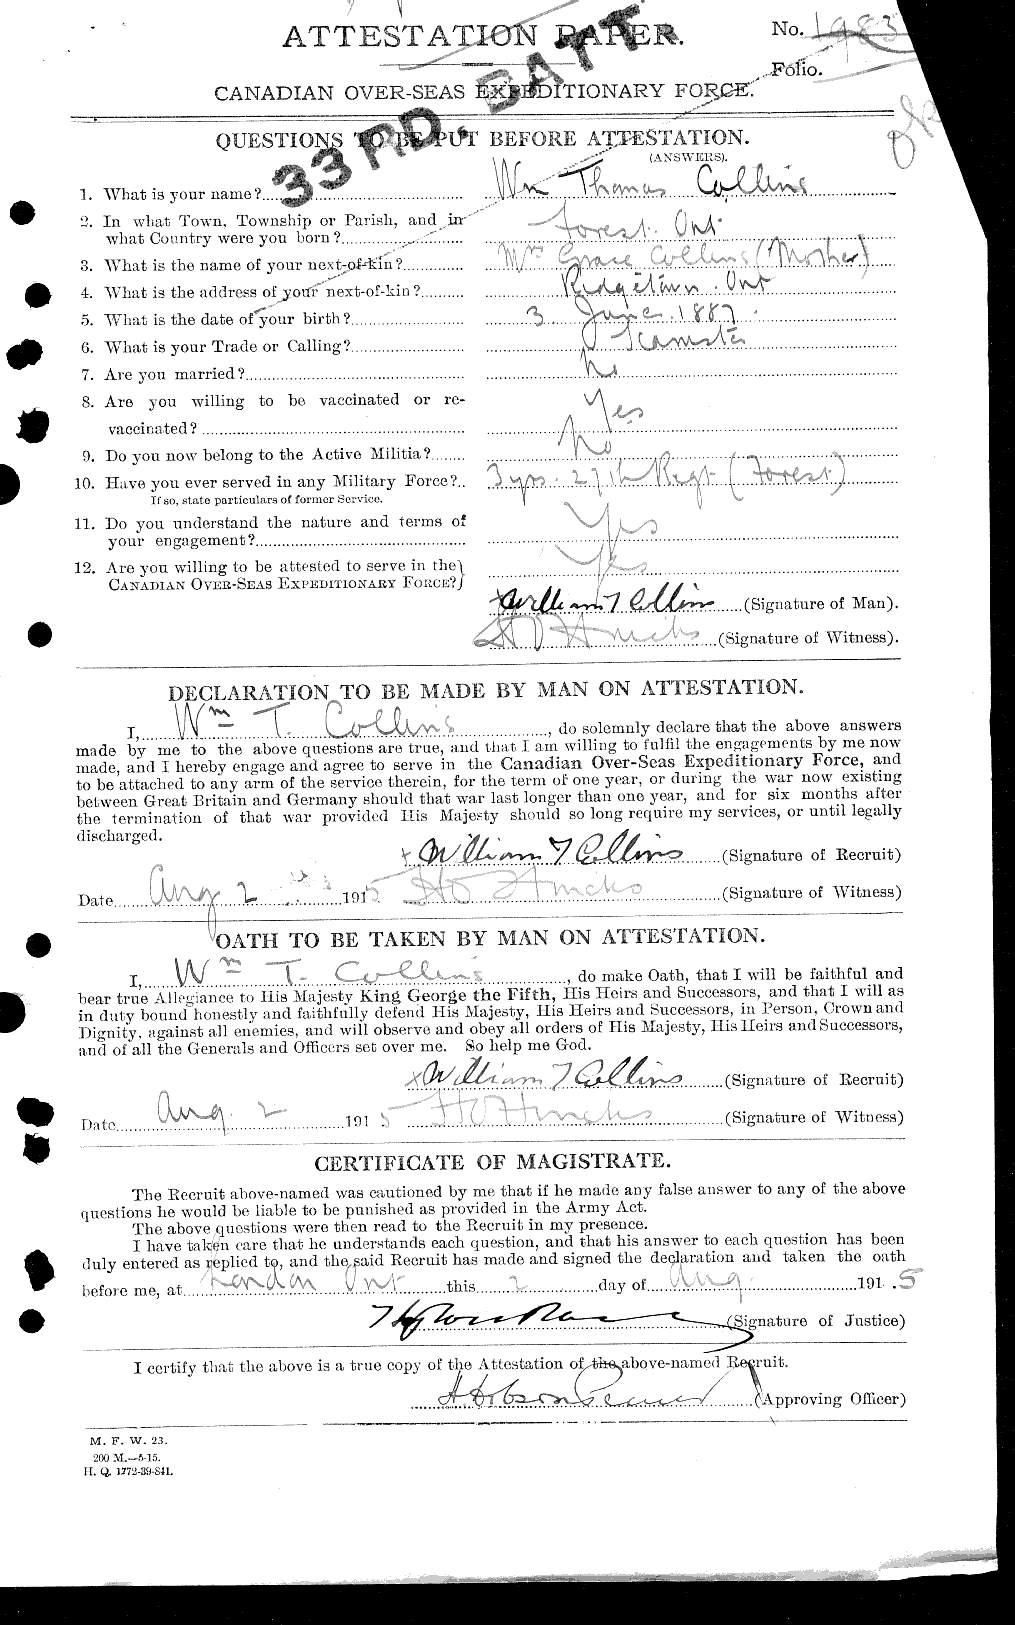 Personnel Records of the First World War - CEF 034635a